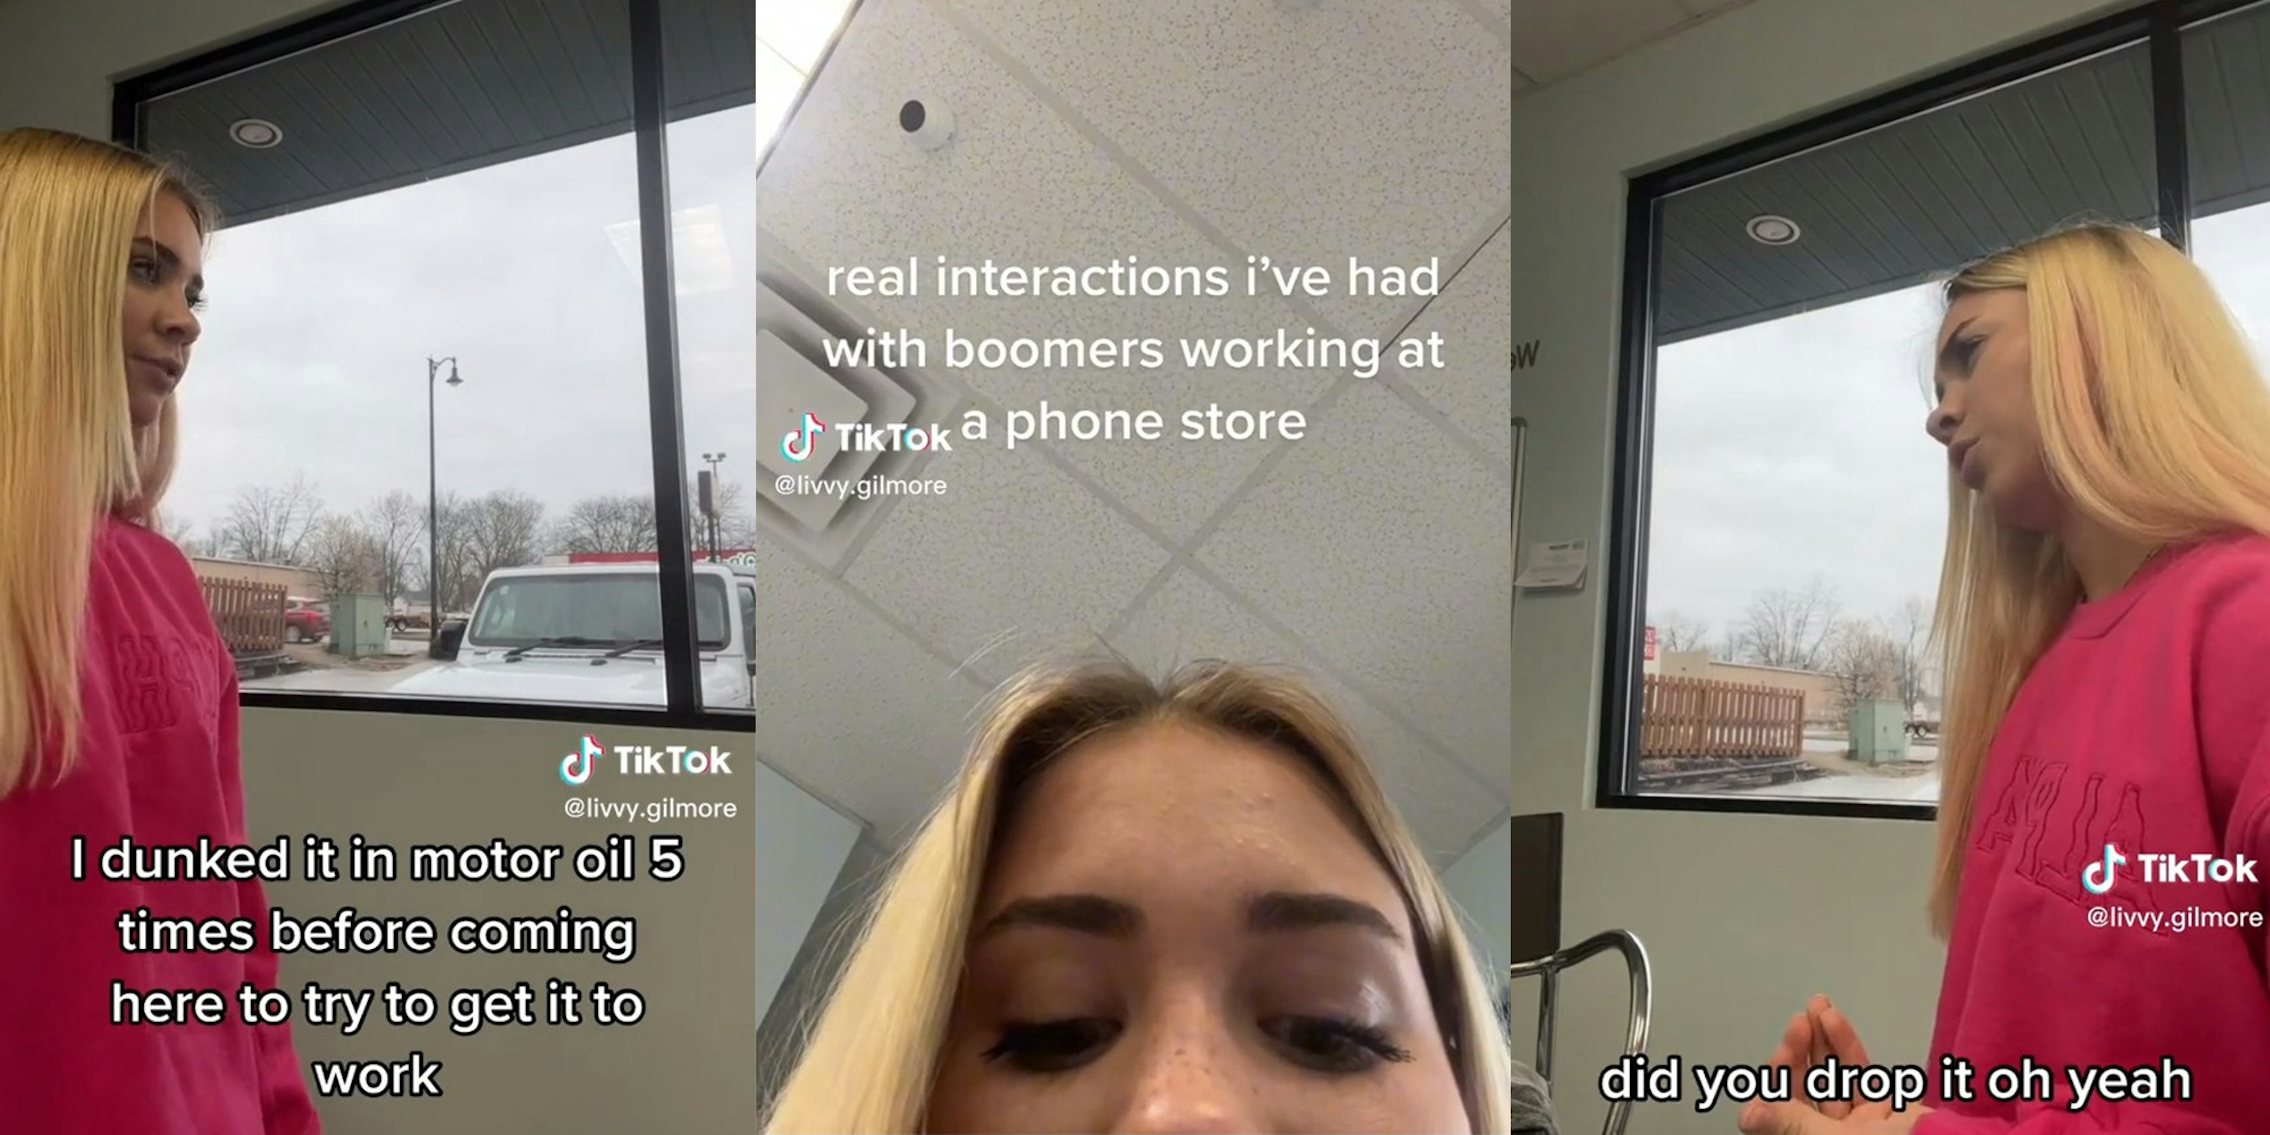 Worker shares frustrating interactions she'd had with boomers while working at a phone store